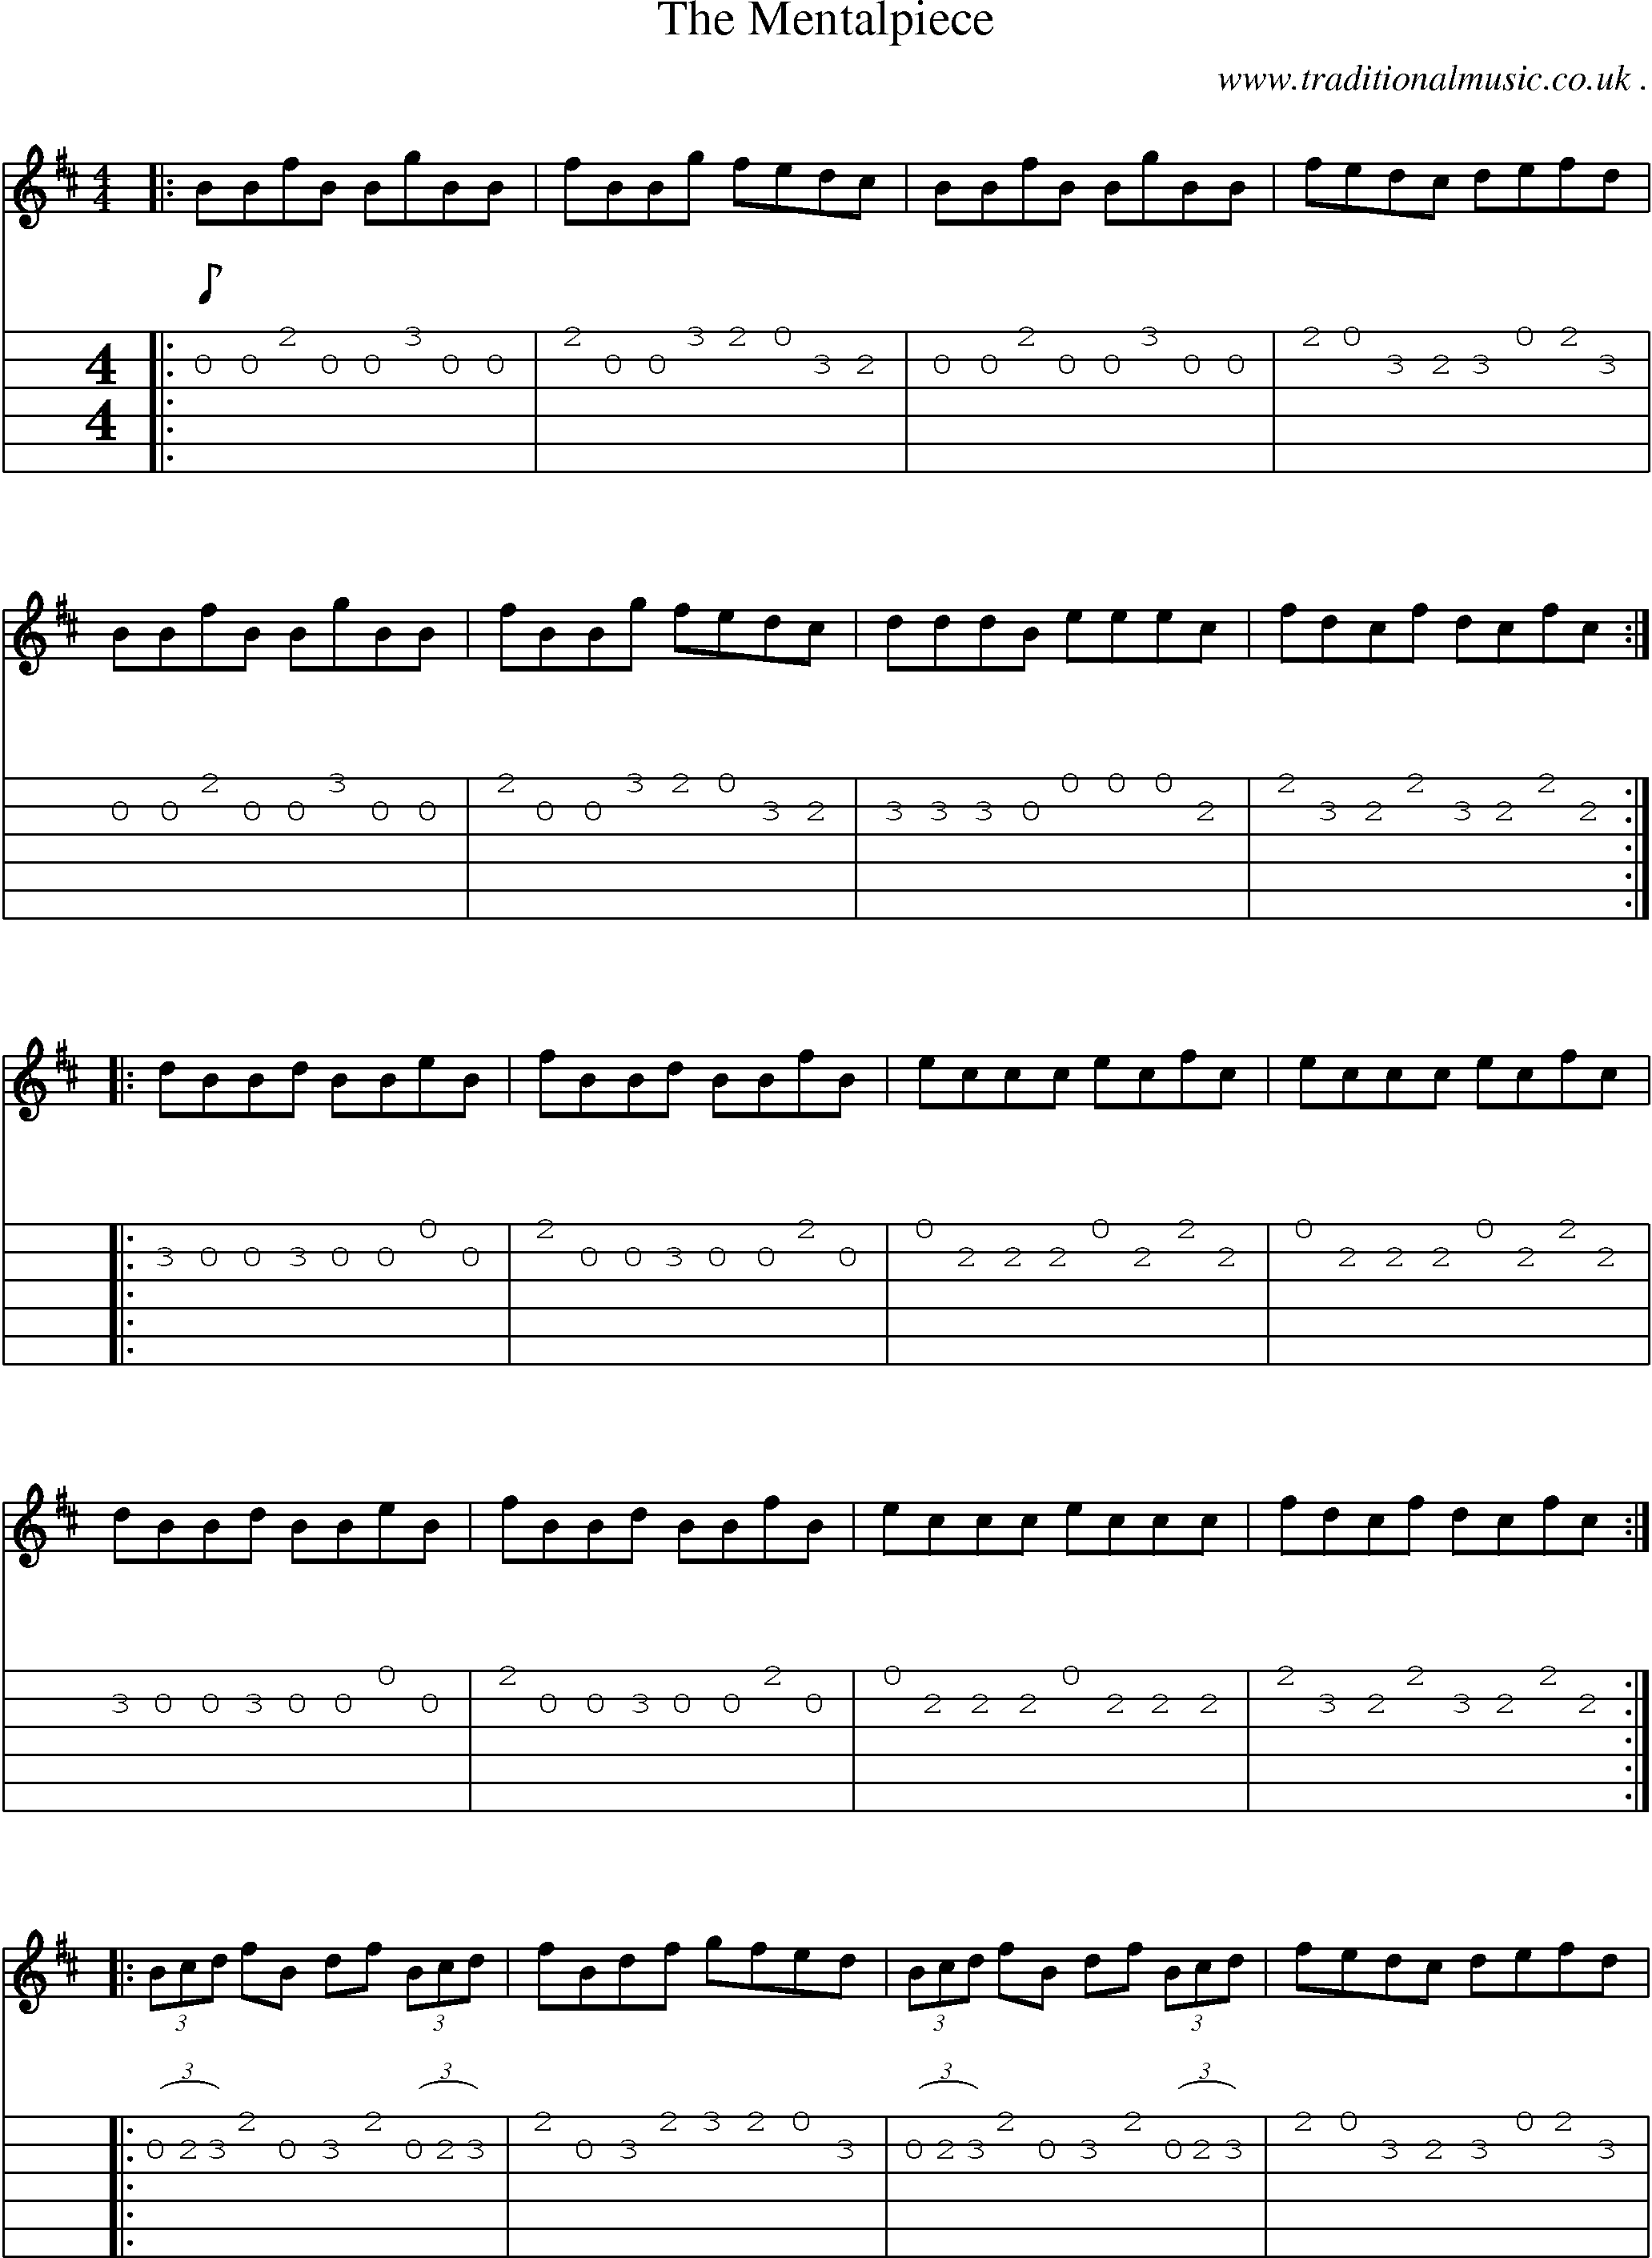 Sheet-Music and Guitar Tabs for The Mentalpiece